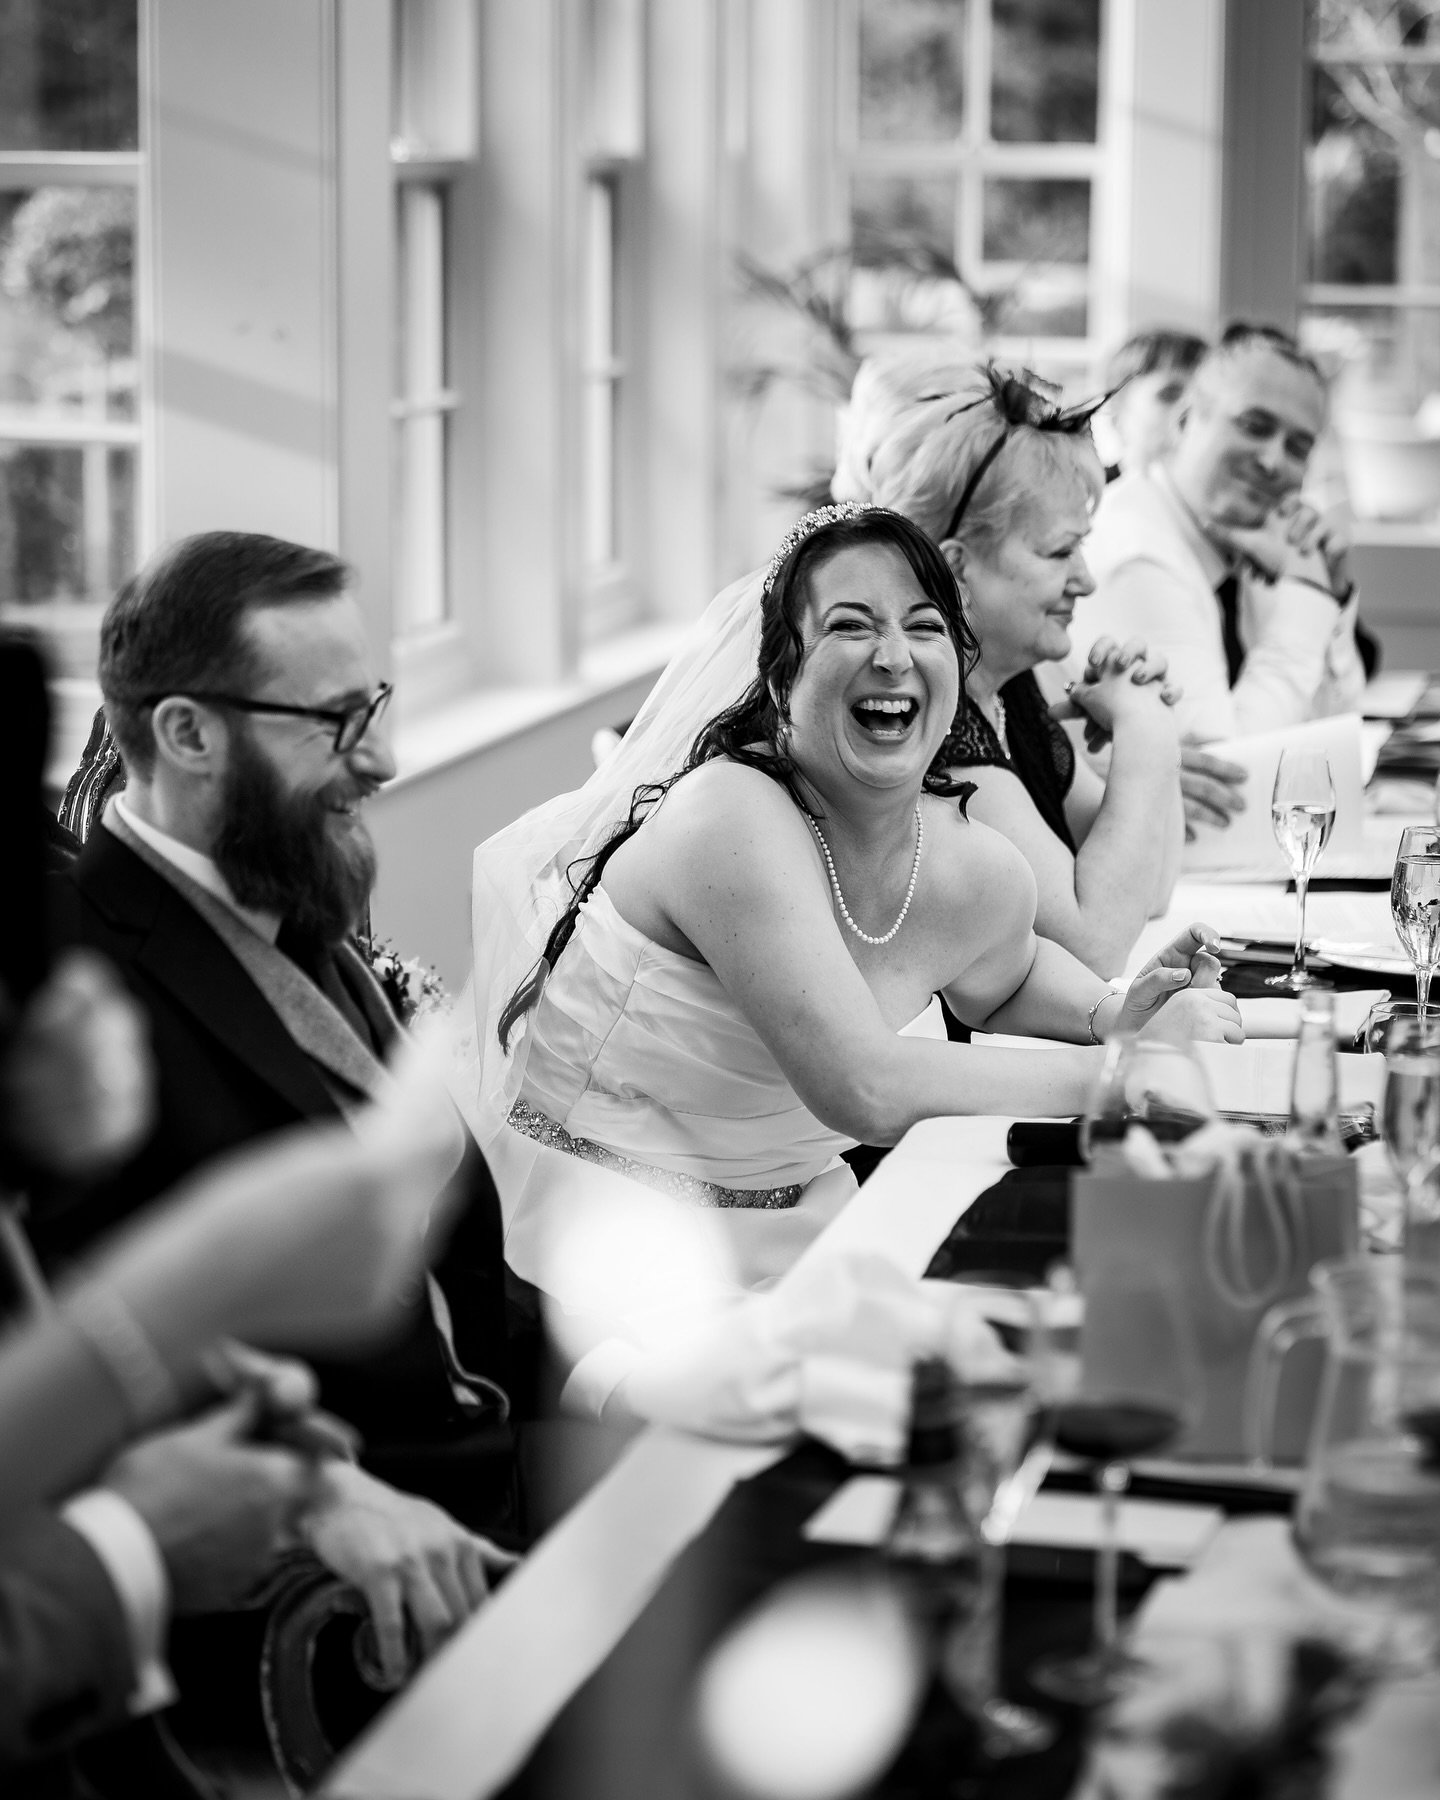 ⚡️ SPEECH TIME ⚡️

Absolutely love some of the reactions I capture during the speeches, from burst of laughter to happy tears, you never know what to expect! 📸

Thank you to everyone who&rsquo;s enquired and booked me to capture their day in 2025 an